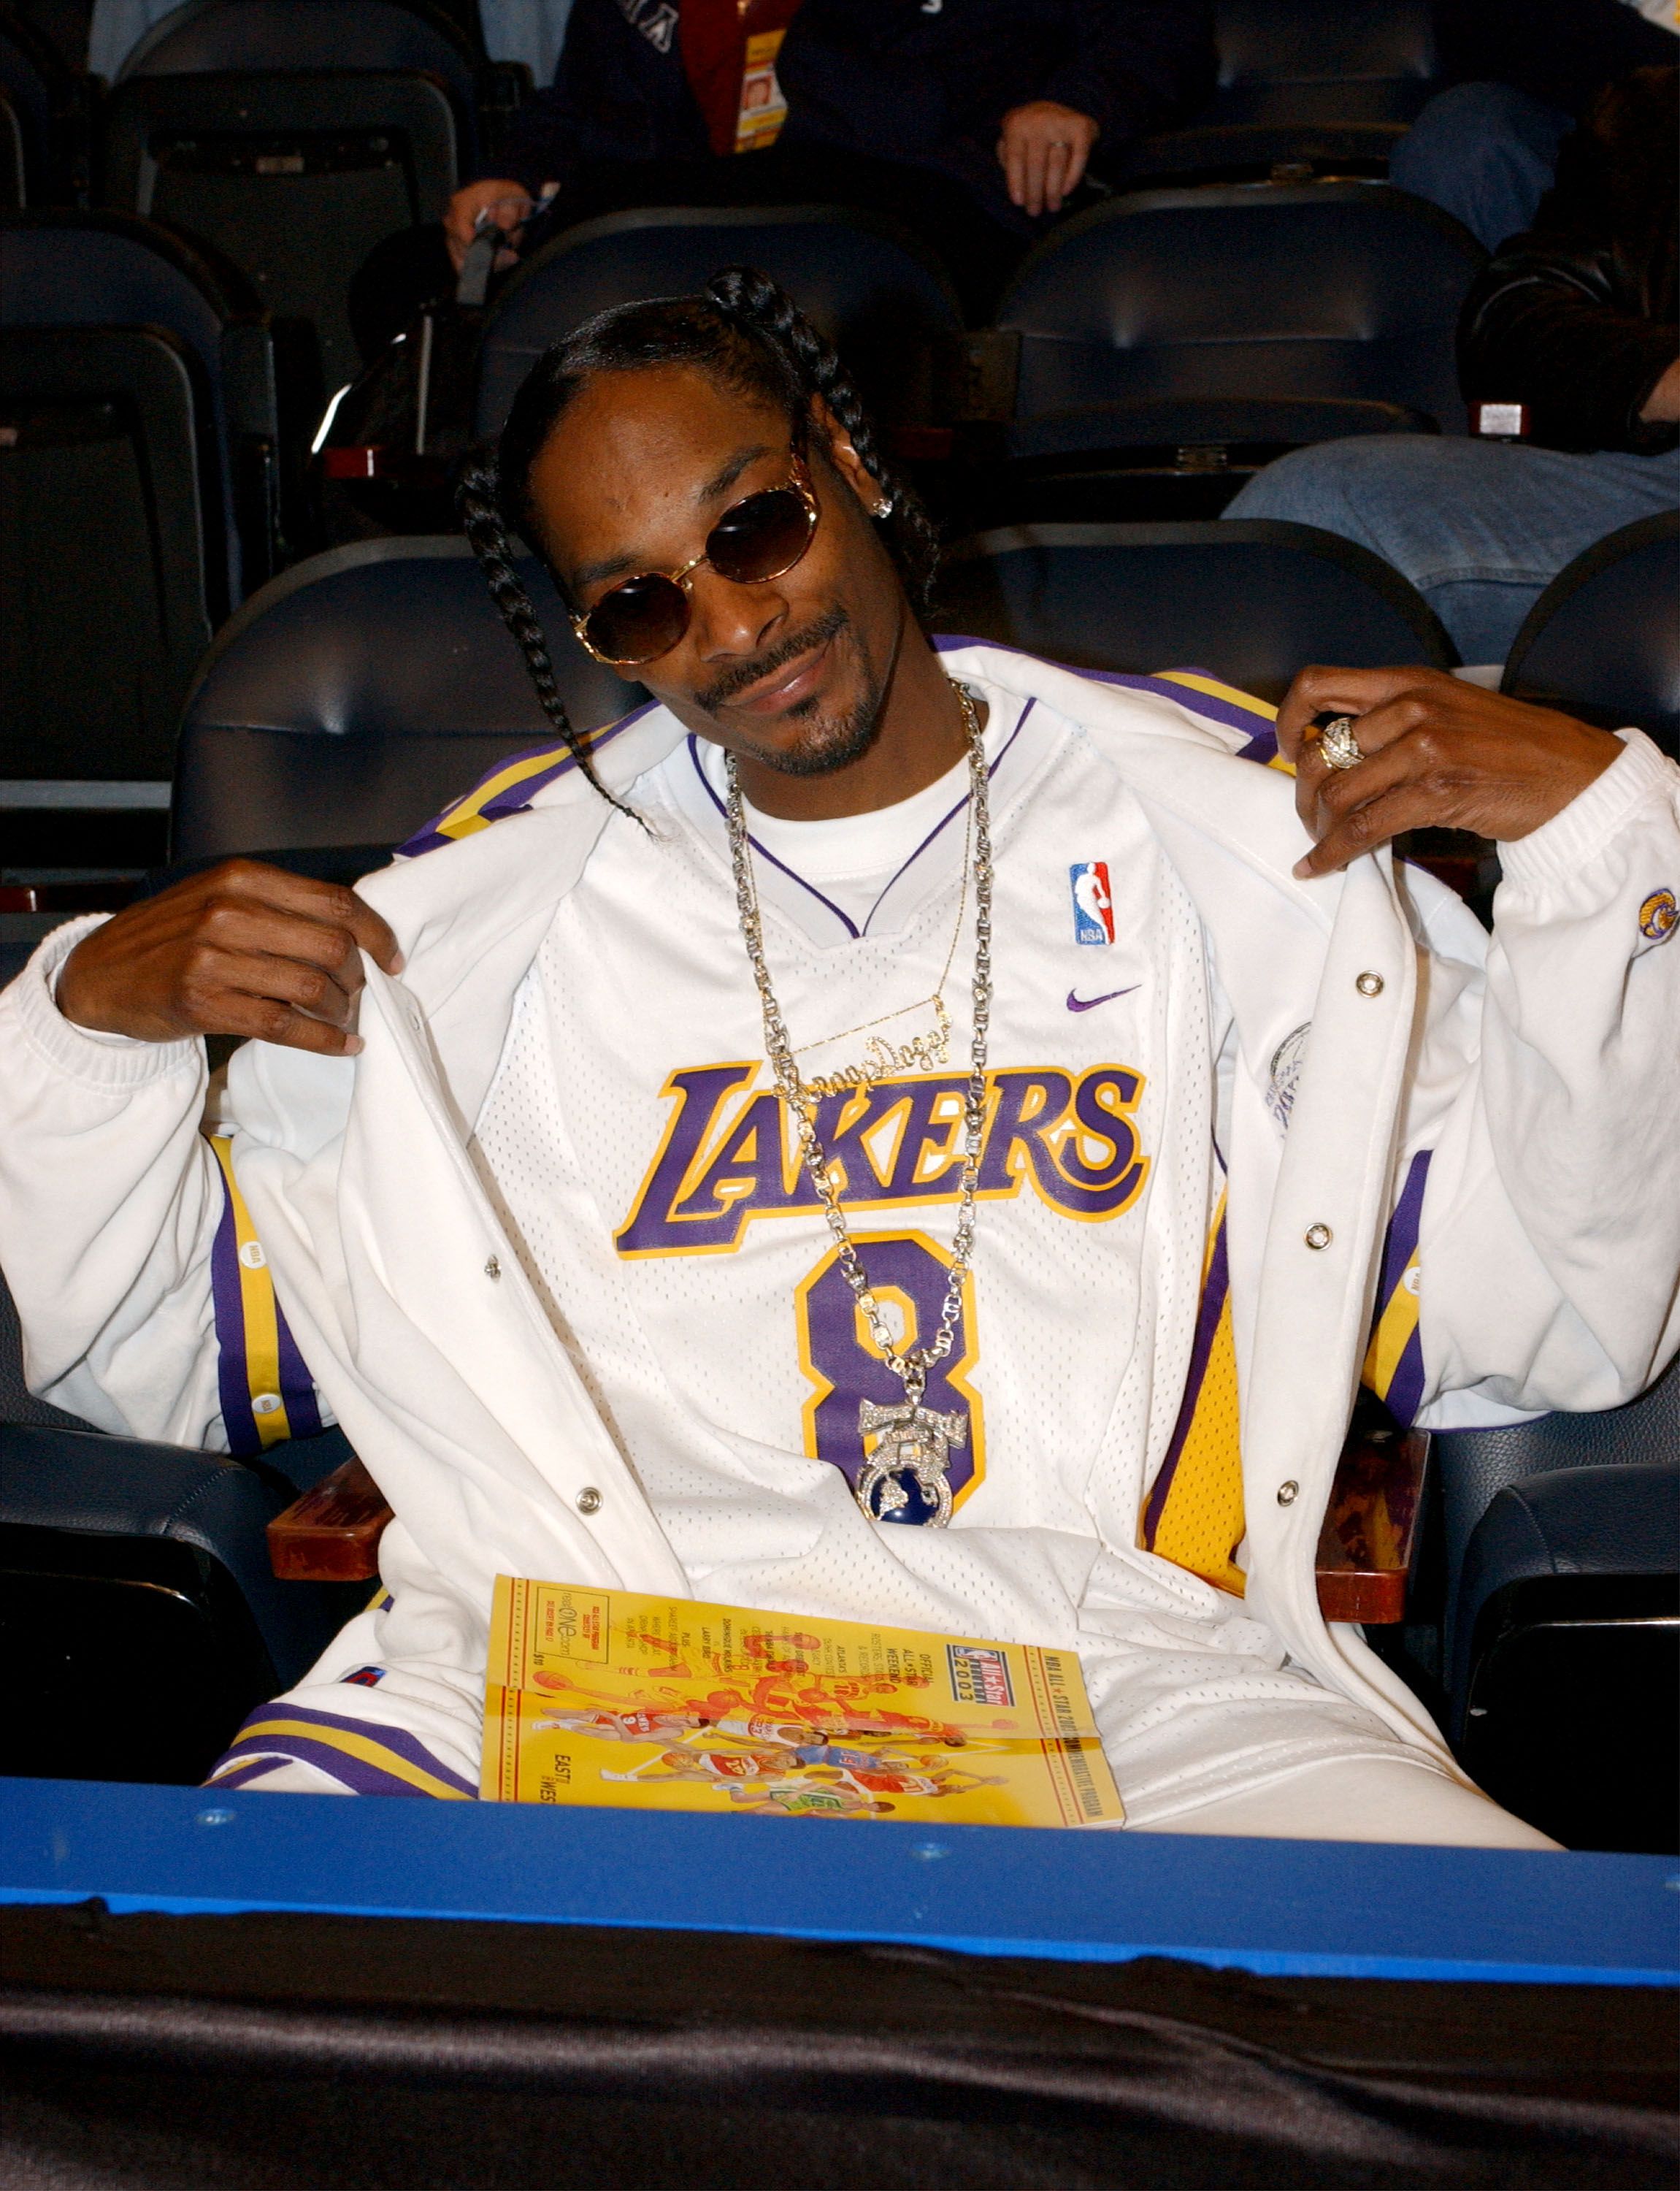 Snoop Dogg at the 2003 NBA All-Star game at the Phillips Arena on February 9, 2003 in Atlanta, Georgia. | Source: Getty Images